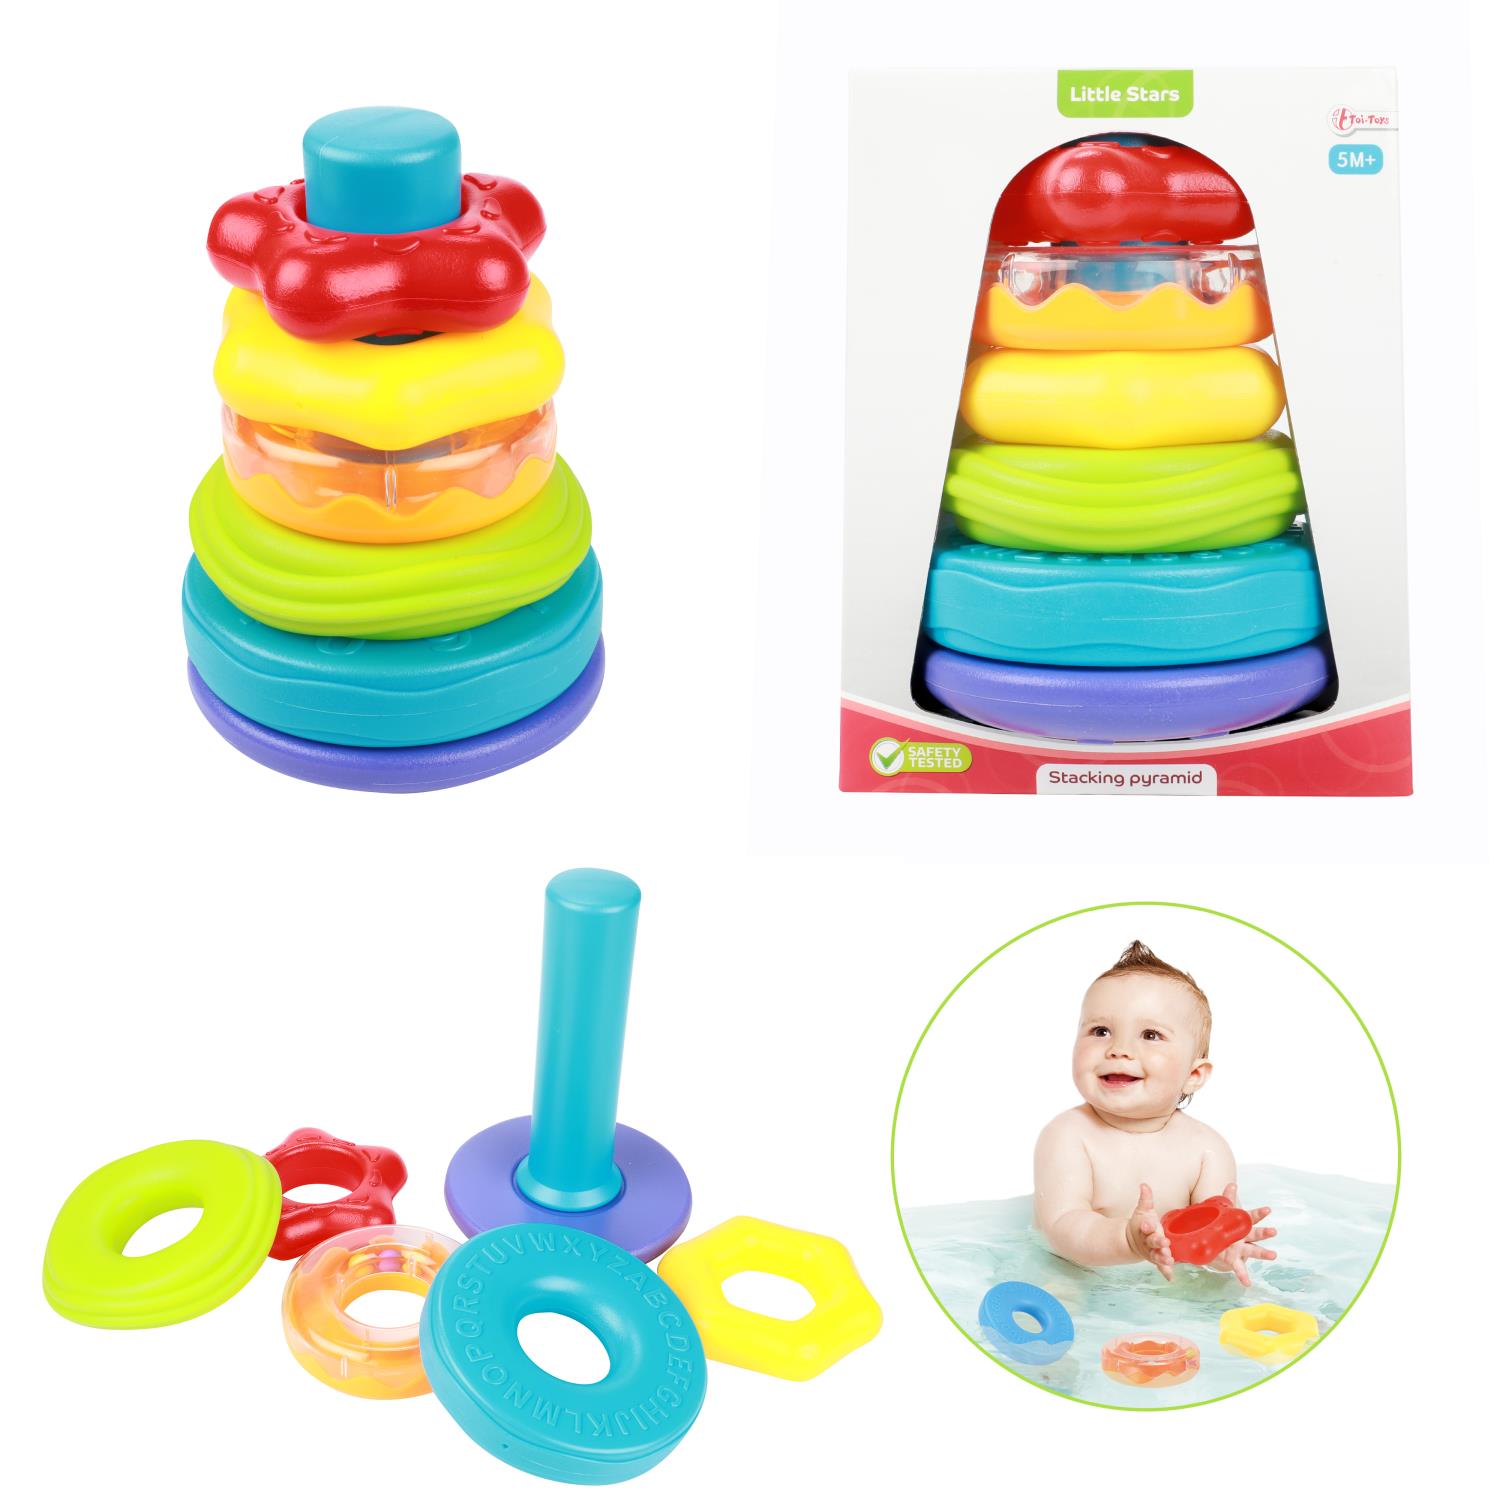 Little Stars Baby Stacking Tower